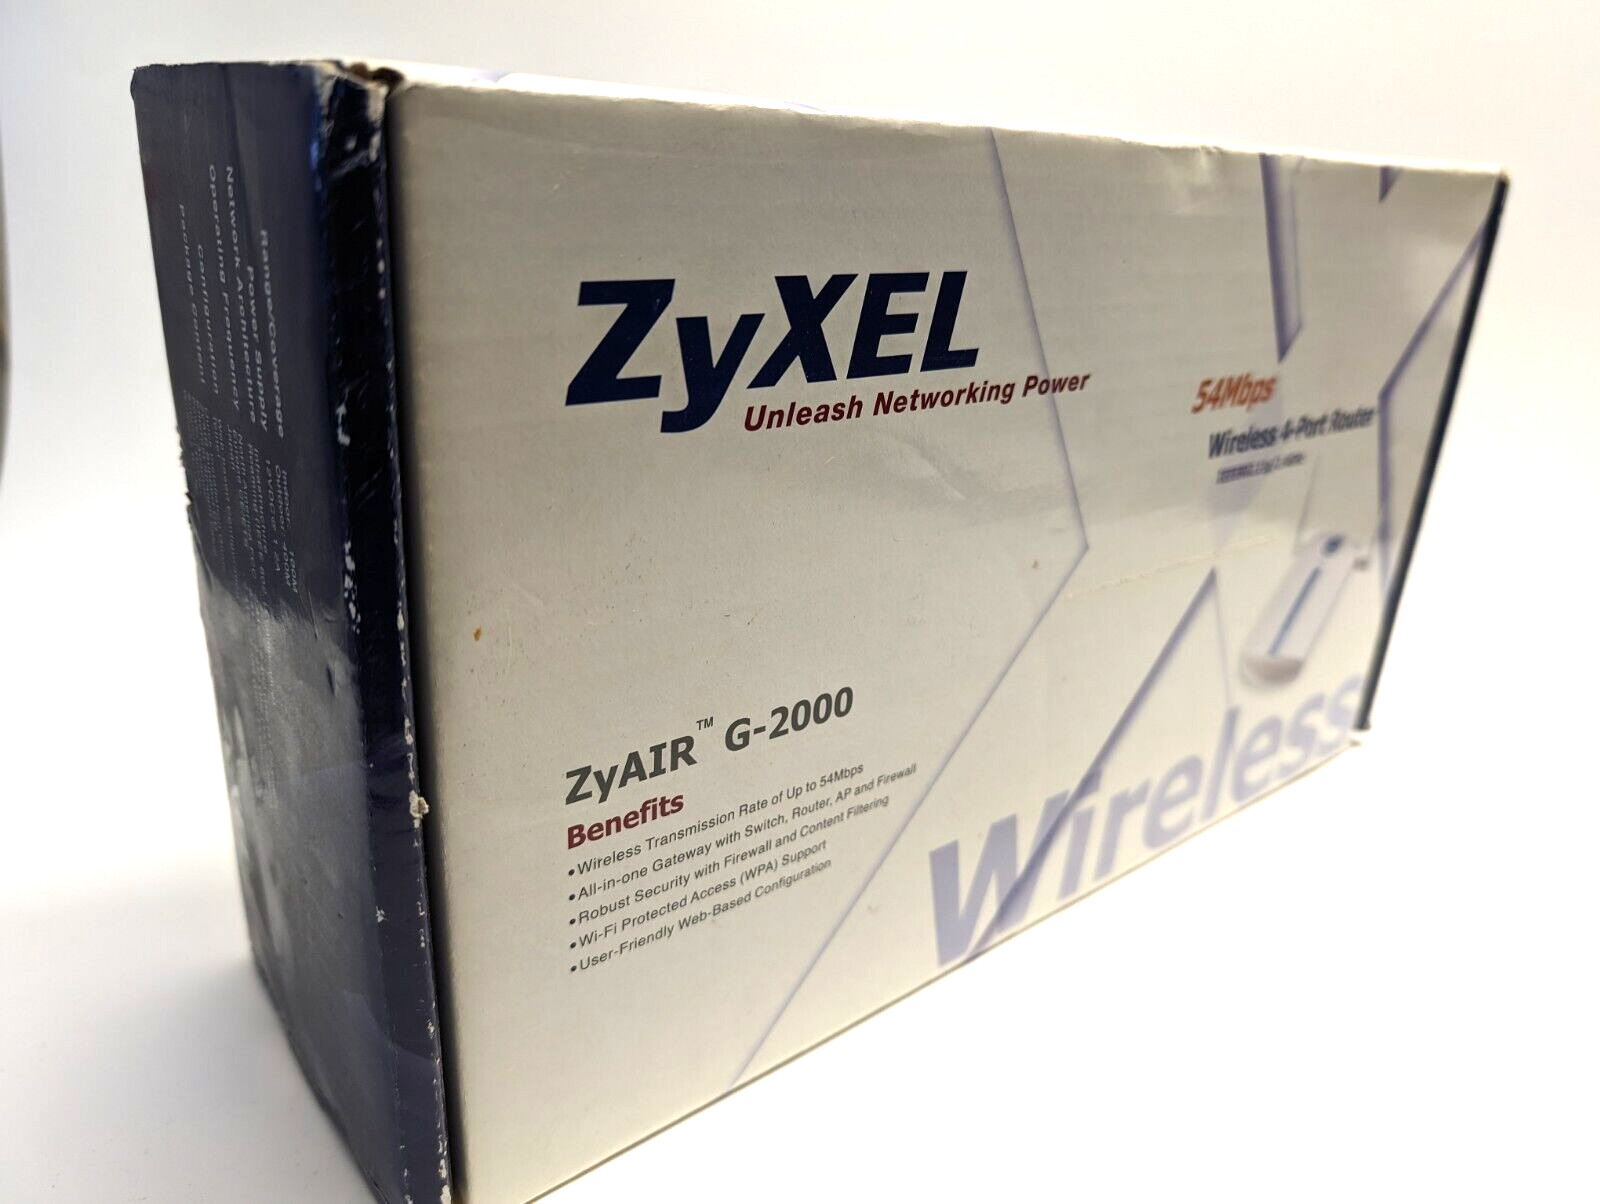 SEALED NEW ZyXEL Zyair G-2000 Plus 54 Mbps 4-port 10/100 Router Wireless